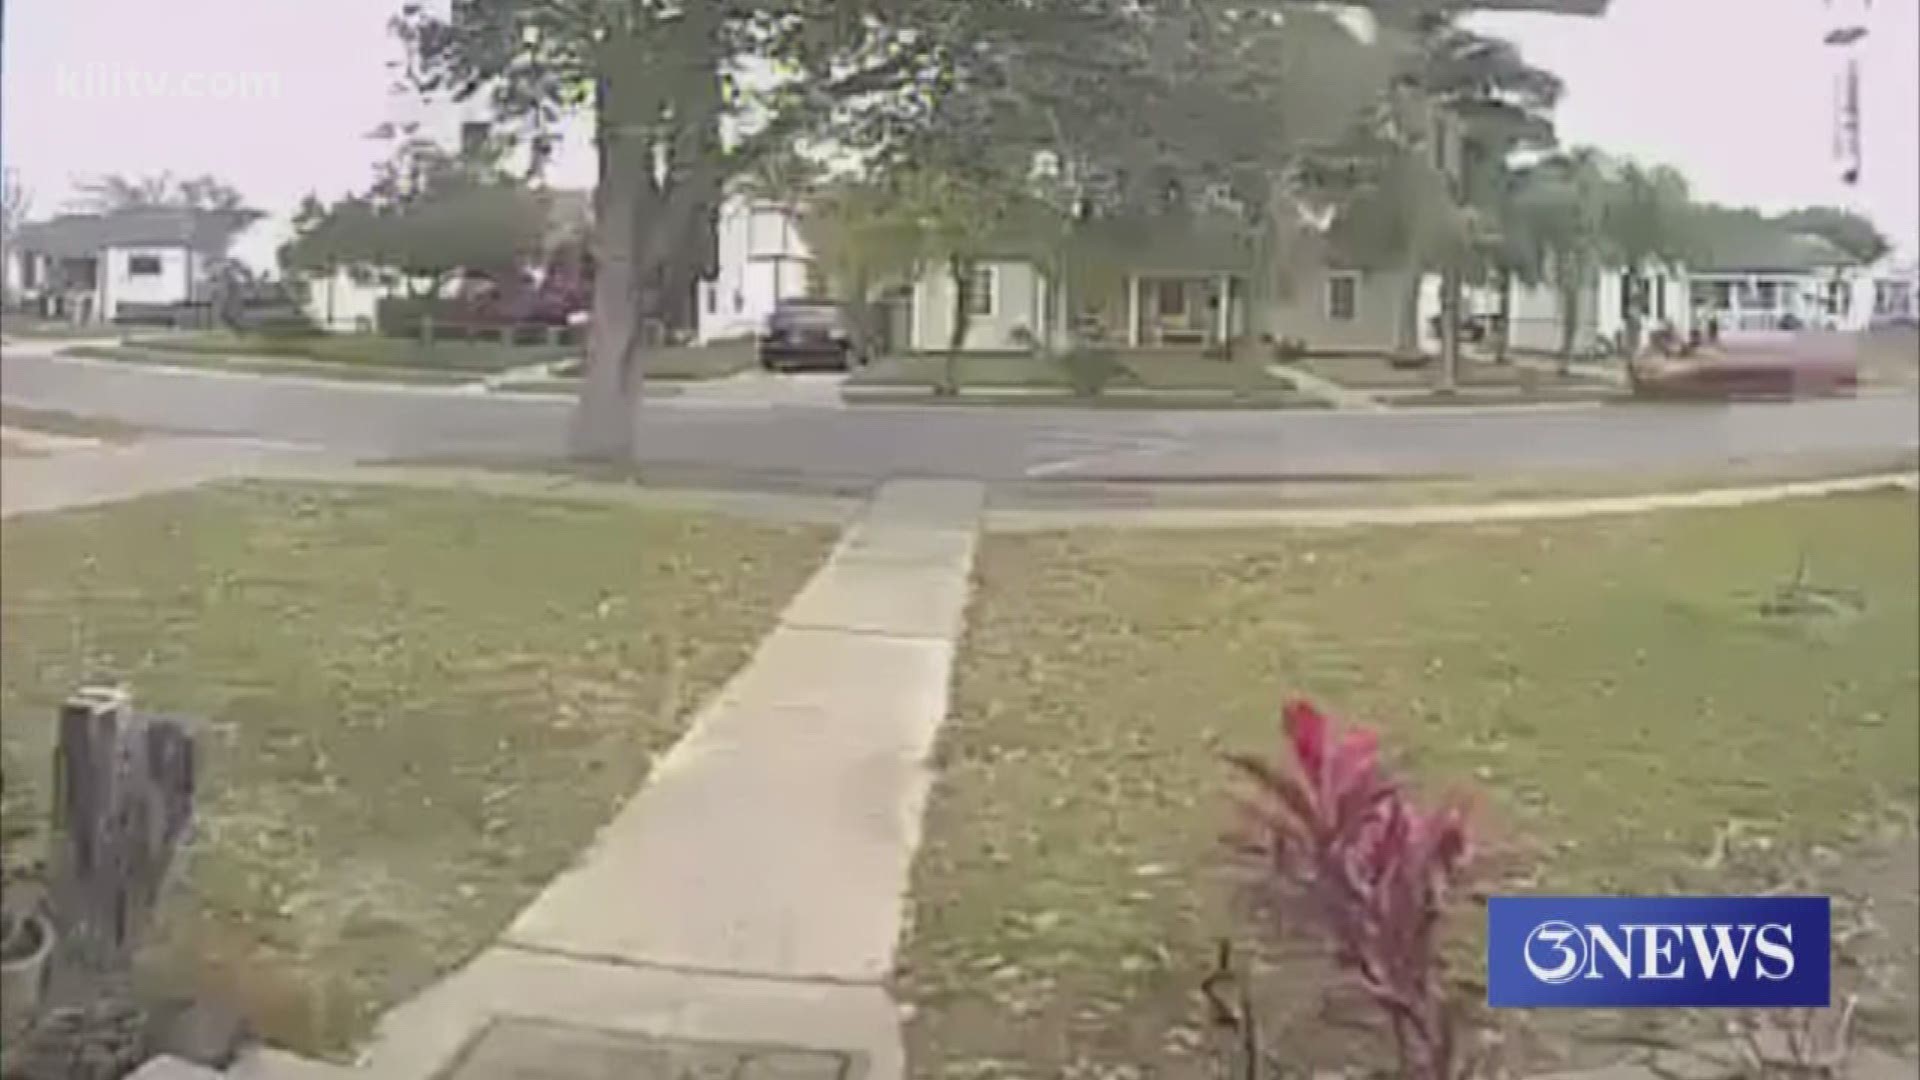 Dramatic video captured Monday afternoon showed the aftermath of an alleged carjacking incident in the middle of a Corpus Christi neighborhood.